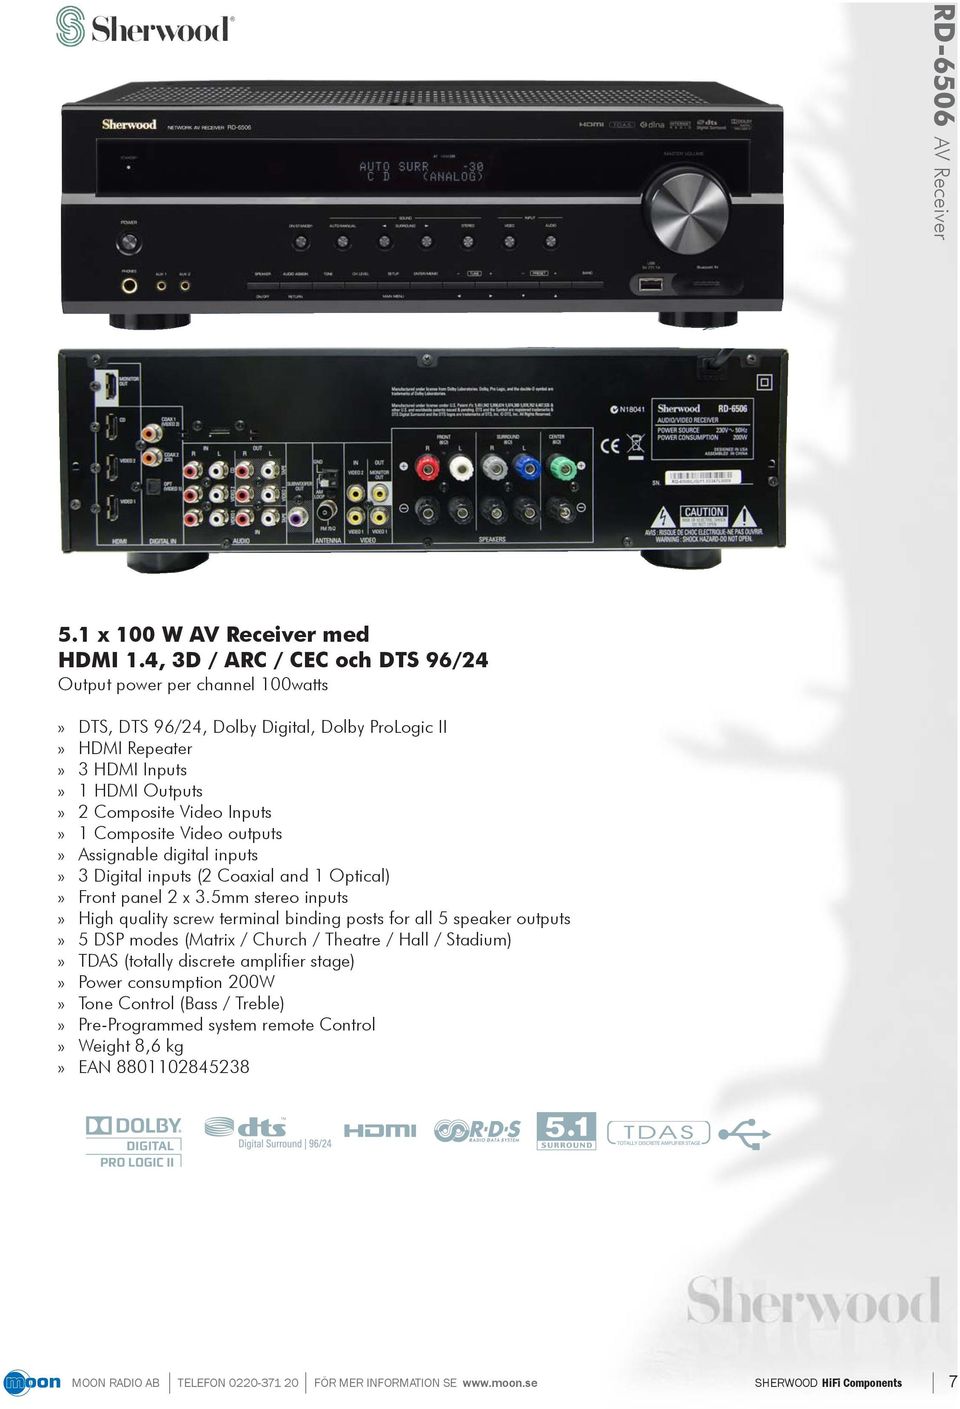 Composite Video Inputs» 1 Composite Video outputs» Assignable digital inputs» 3 Digital inputs (2 Coaxial and 1 Optical)» Front panel 2 x 3.